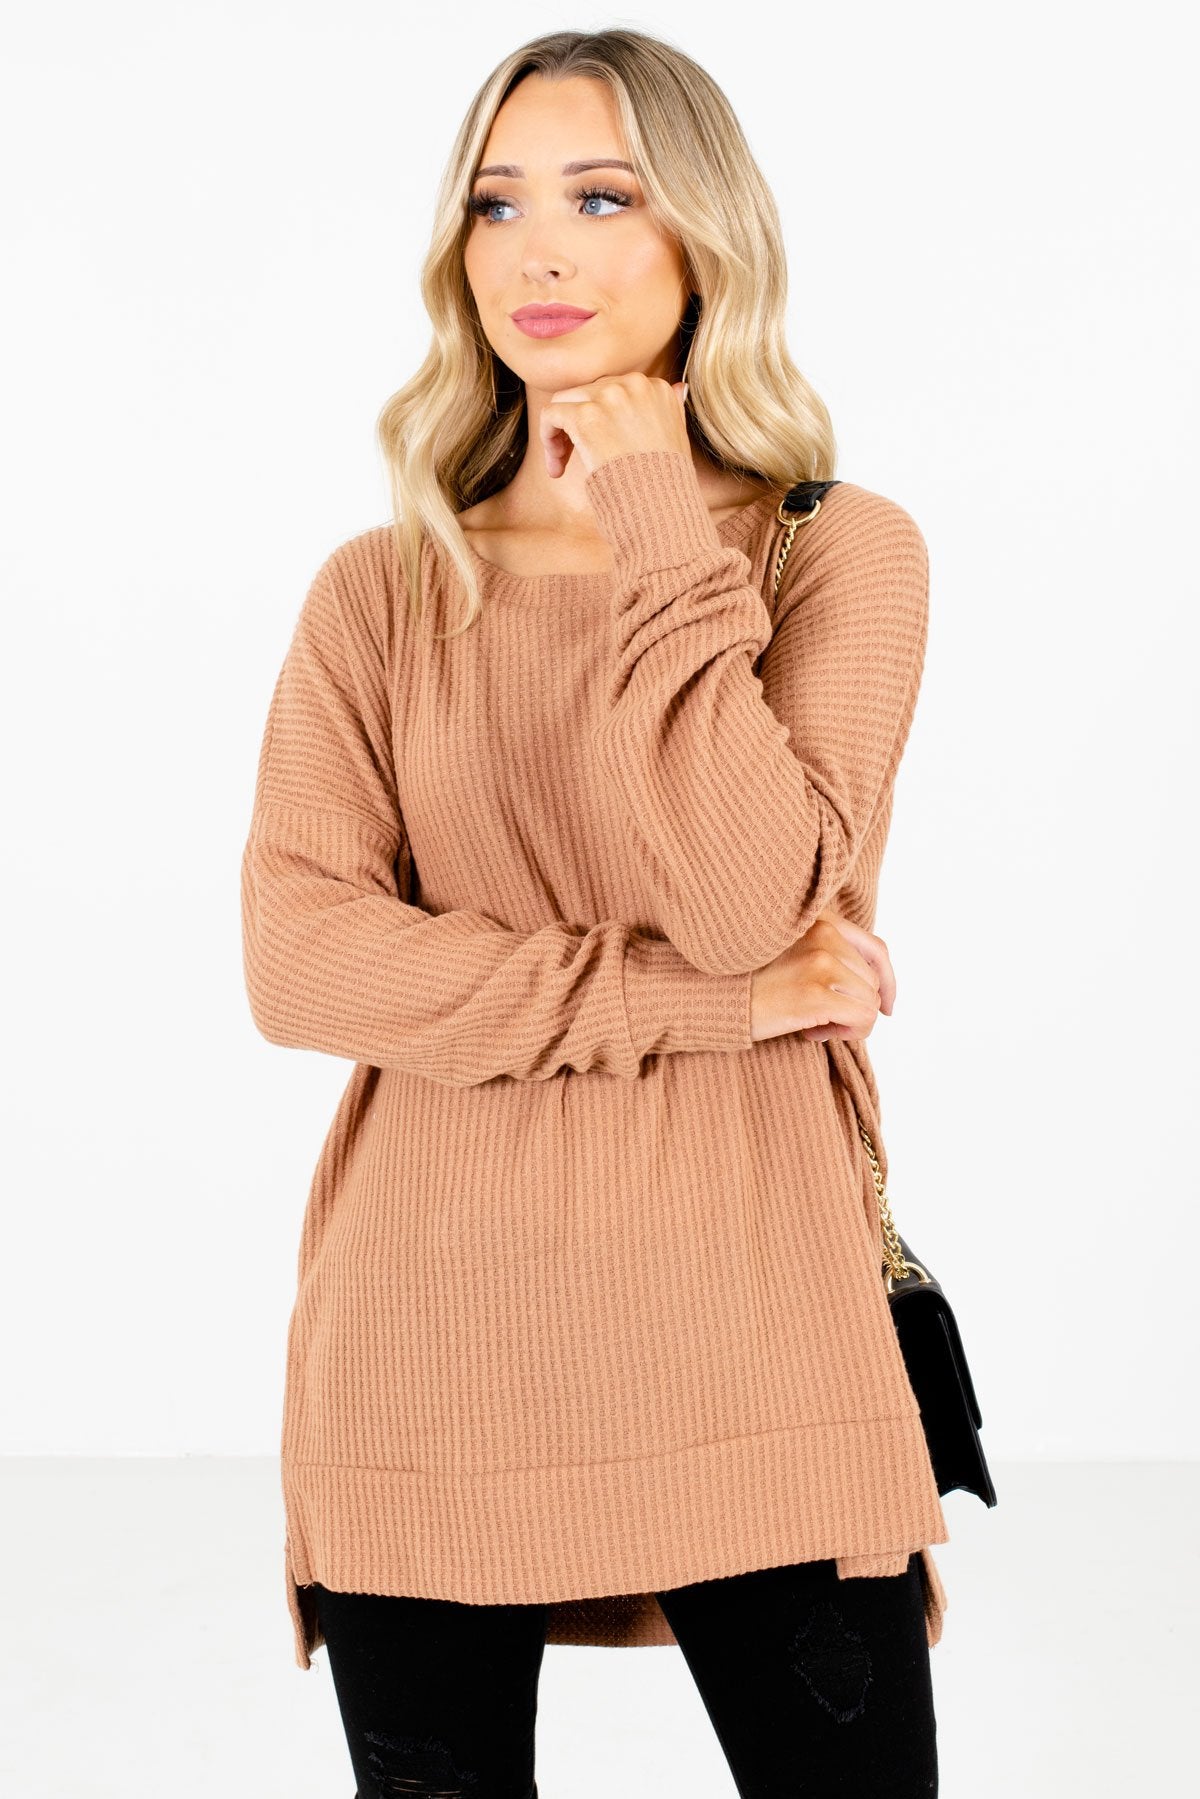 Women’s Tan Brown Cozy and Warm Boutique Tops